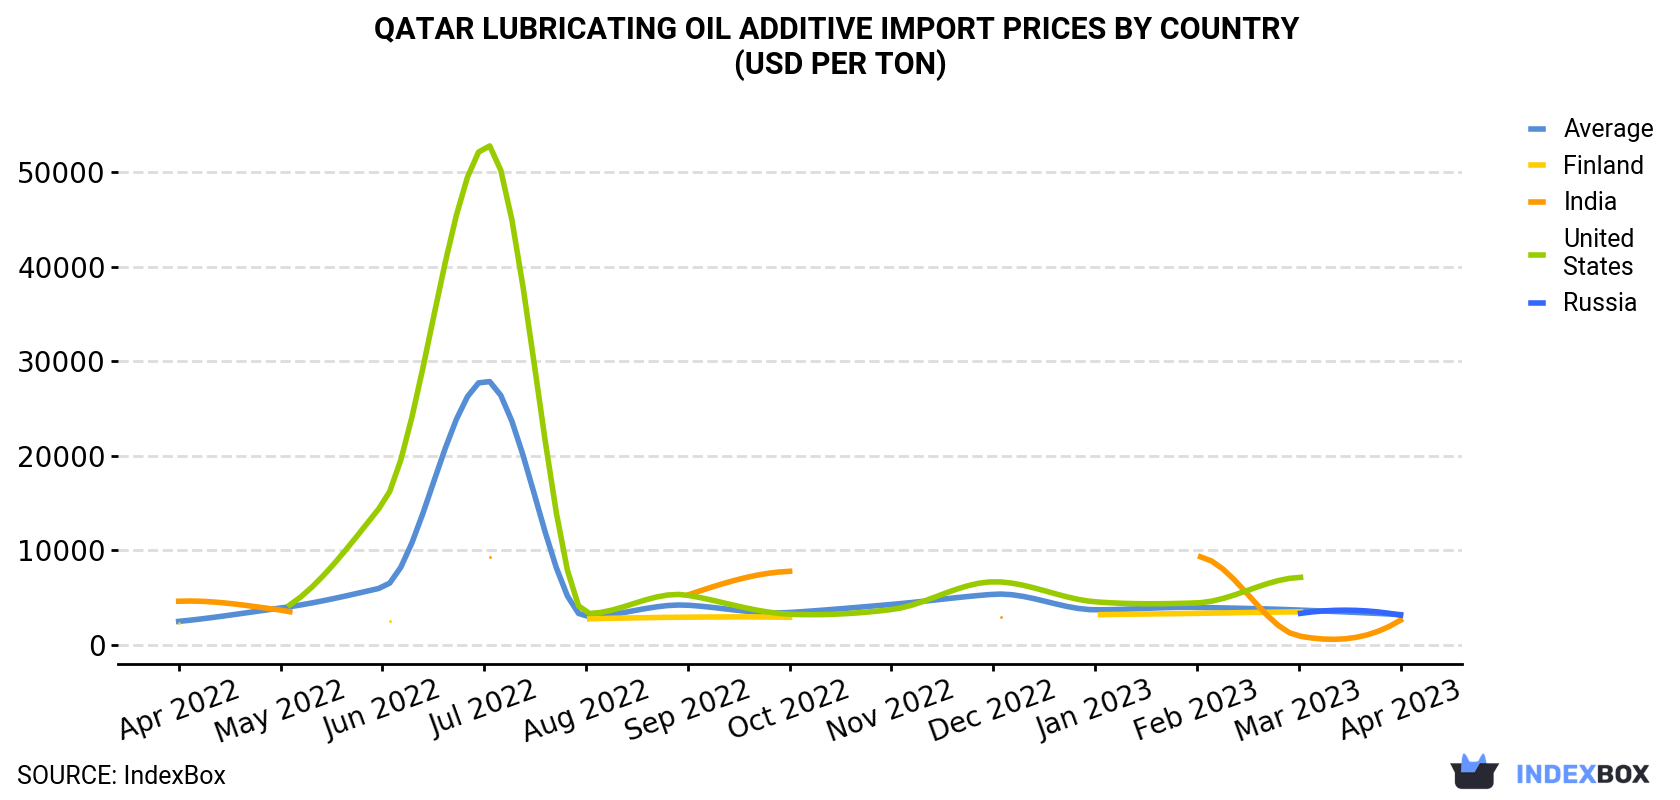 Qatar Lubricating Oil Additive Import Prices By Country (USD Per Ton)